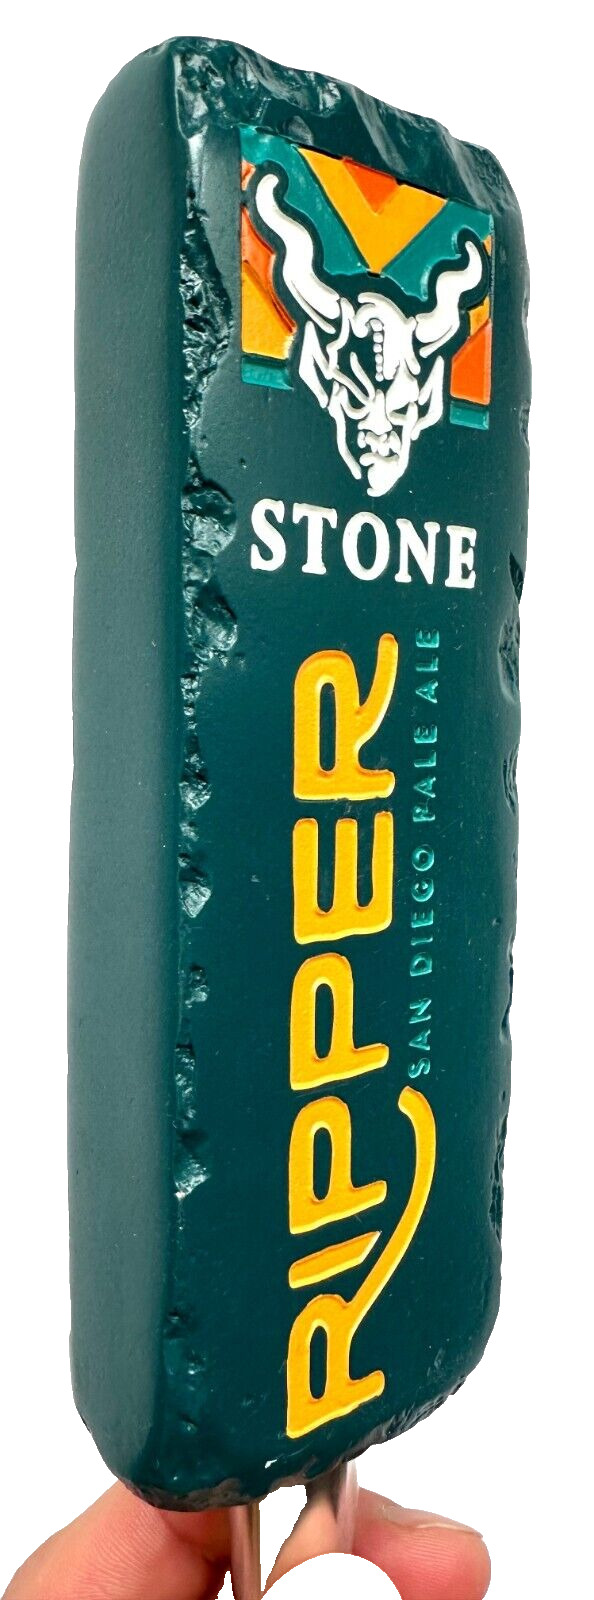 *NEW* STONE BREWING - RIPPER - SAN DIEGO PALE ALE - BEER TAP HANDLE